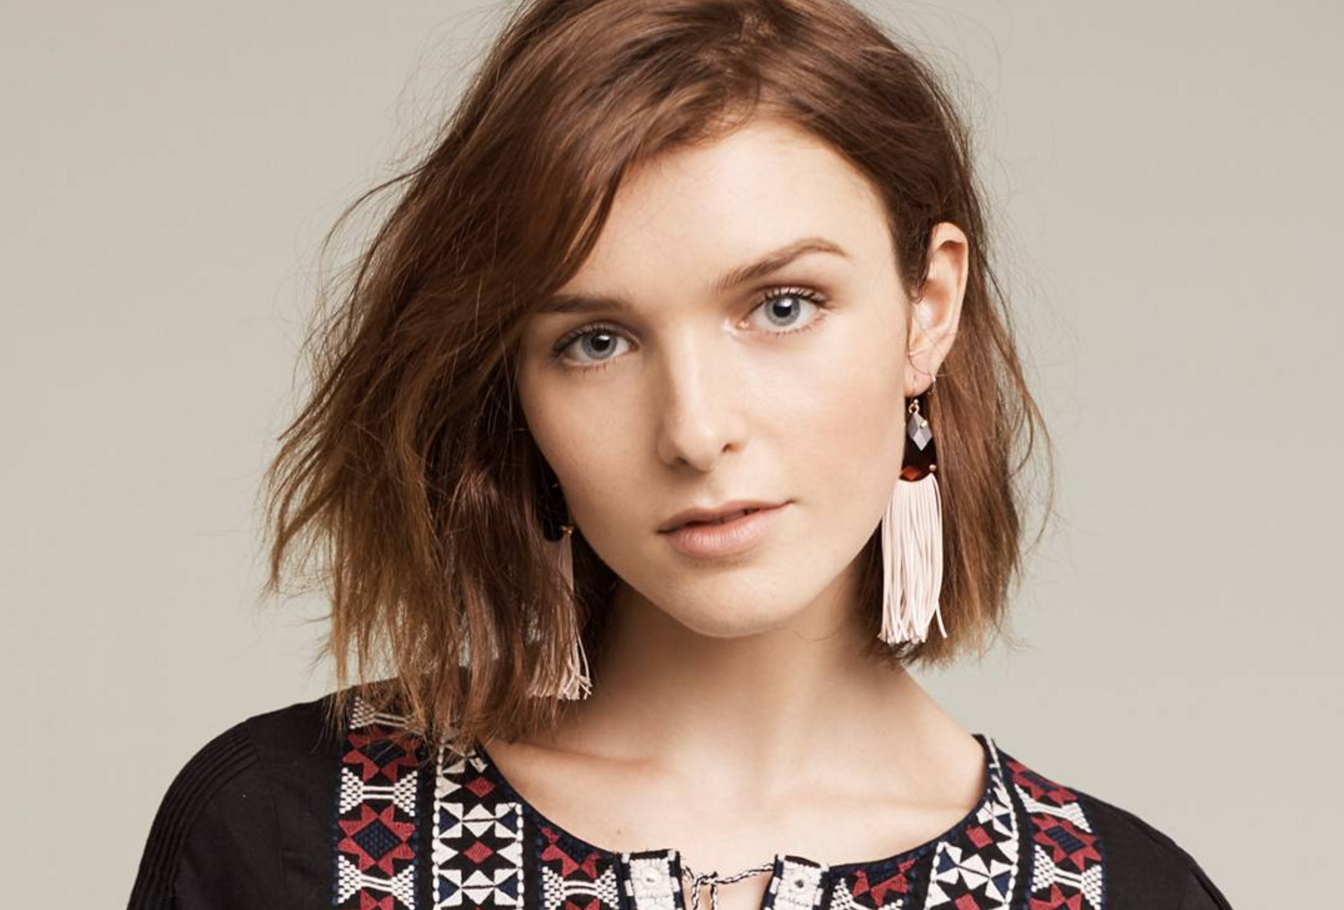 Anthropologie's Tag Sale adds new markdown delights with an extra 40% off!